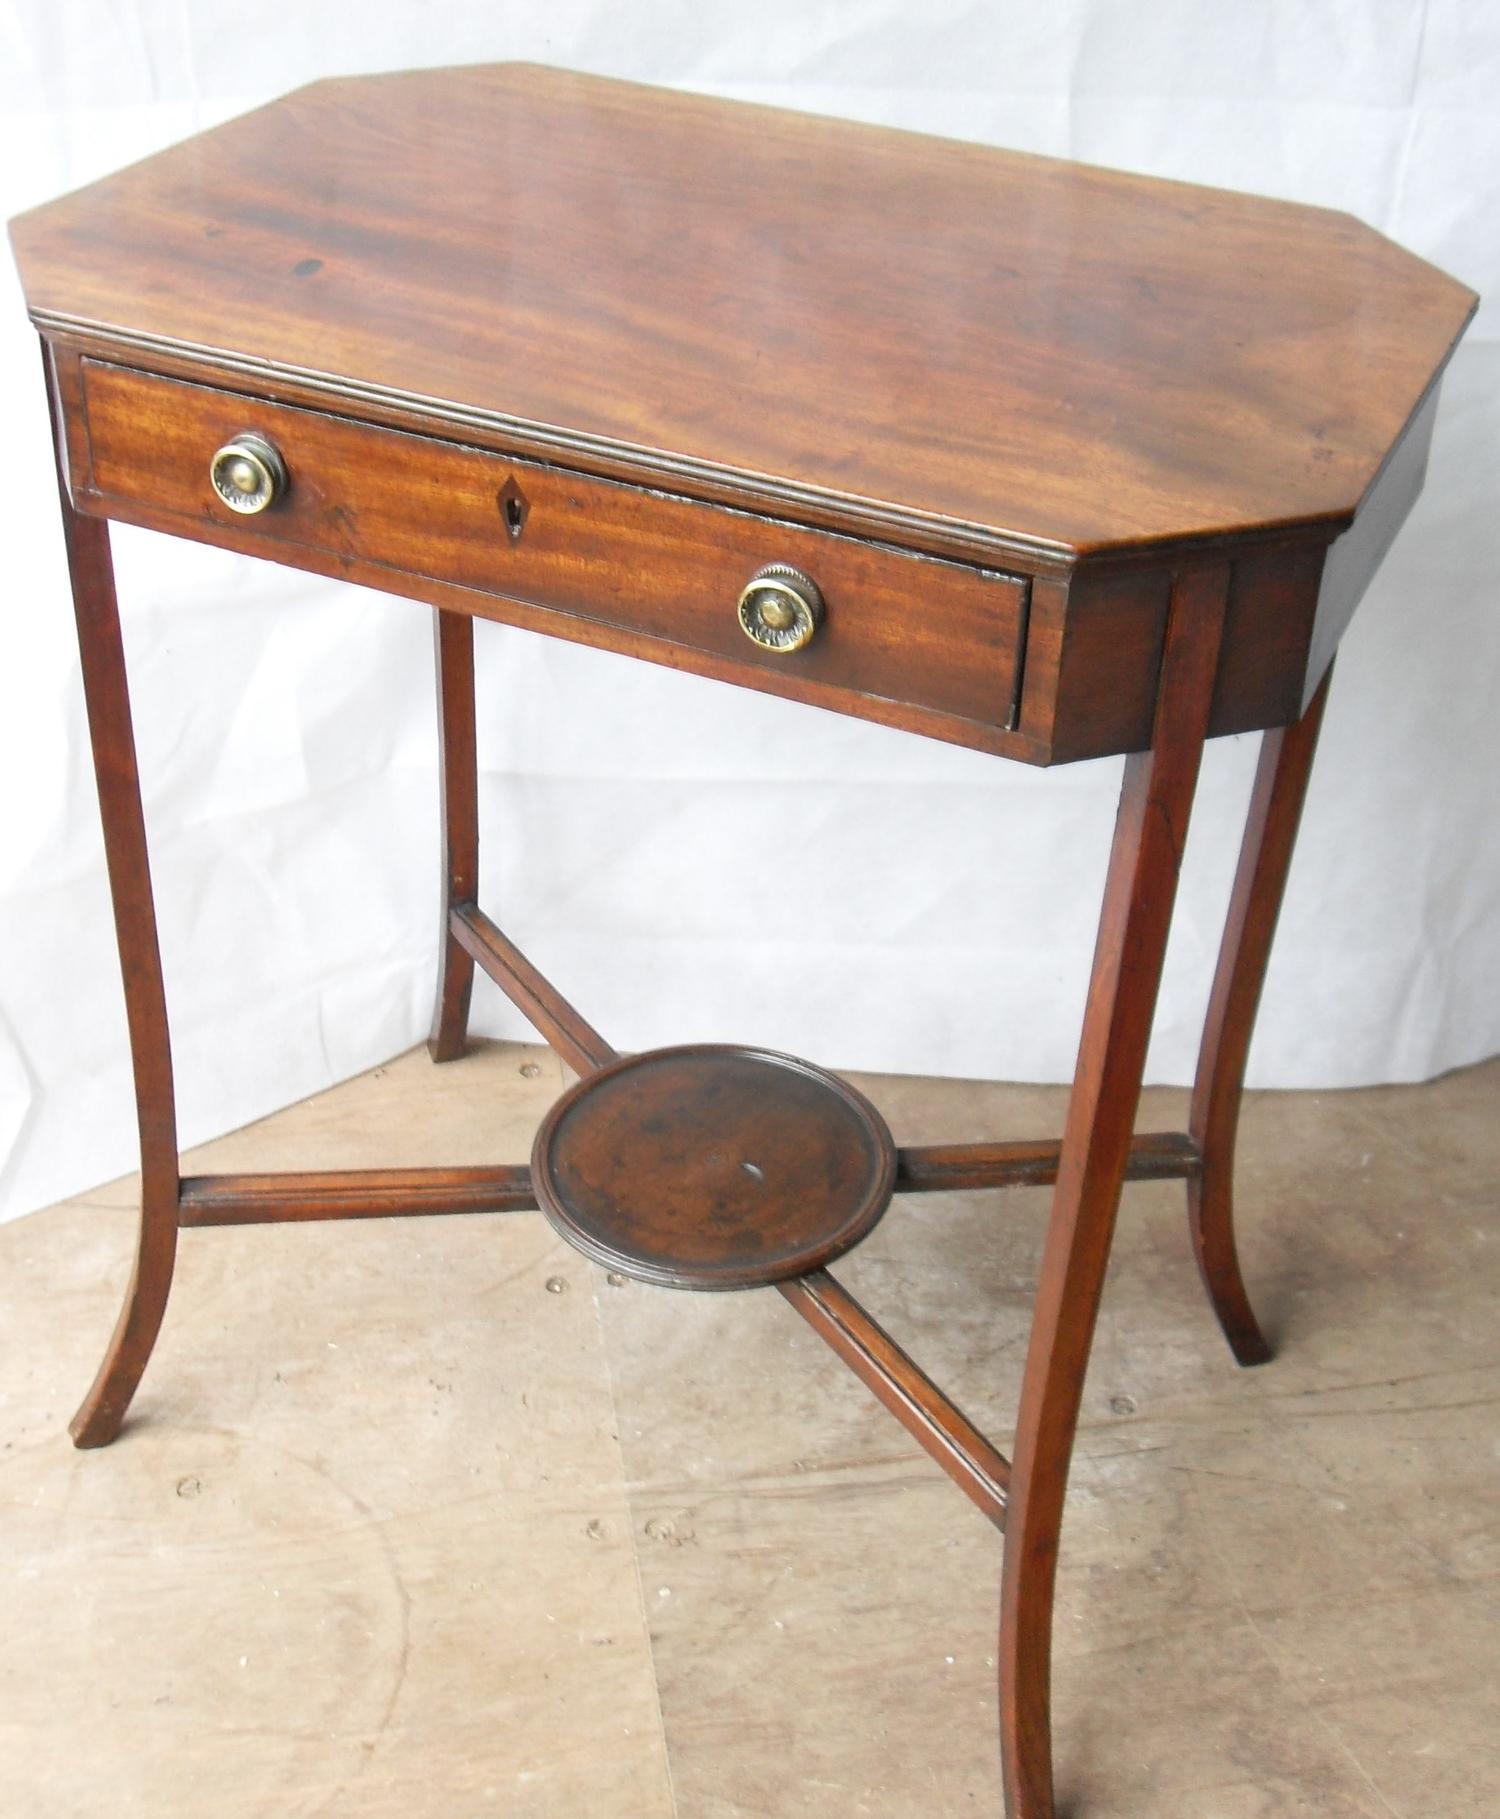 A Regency mahogany rectangular occasional table with canted corners, frieze drawer with brass drop